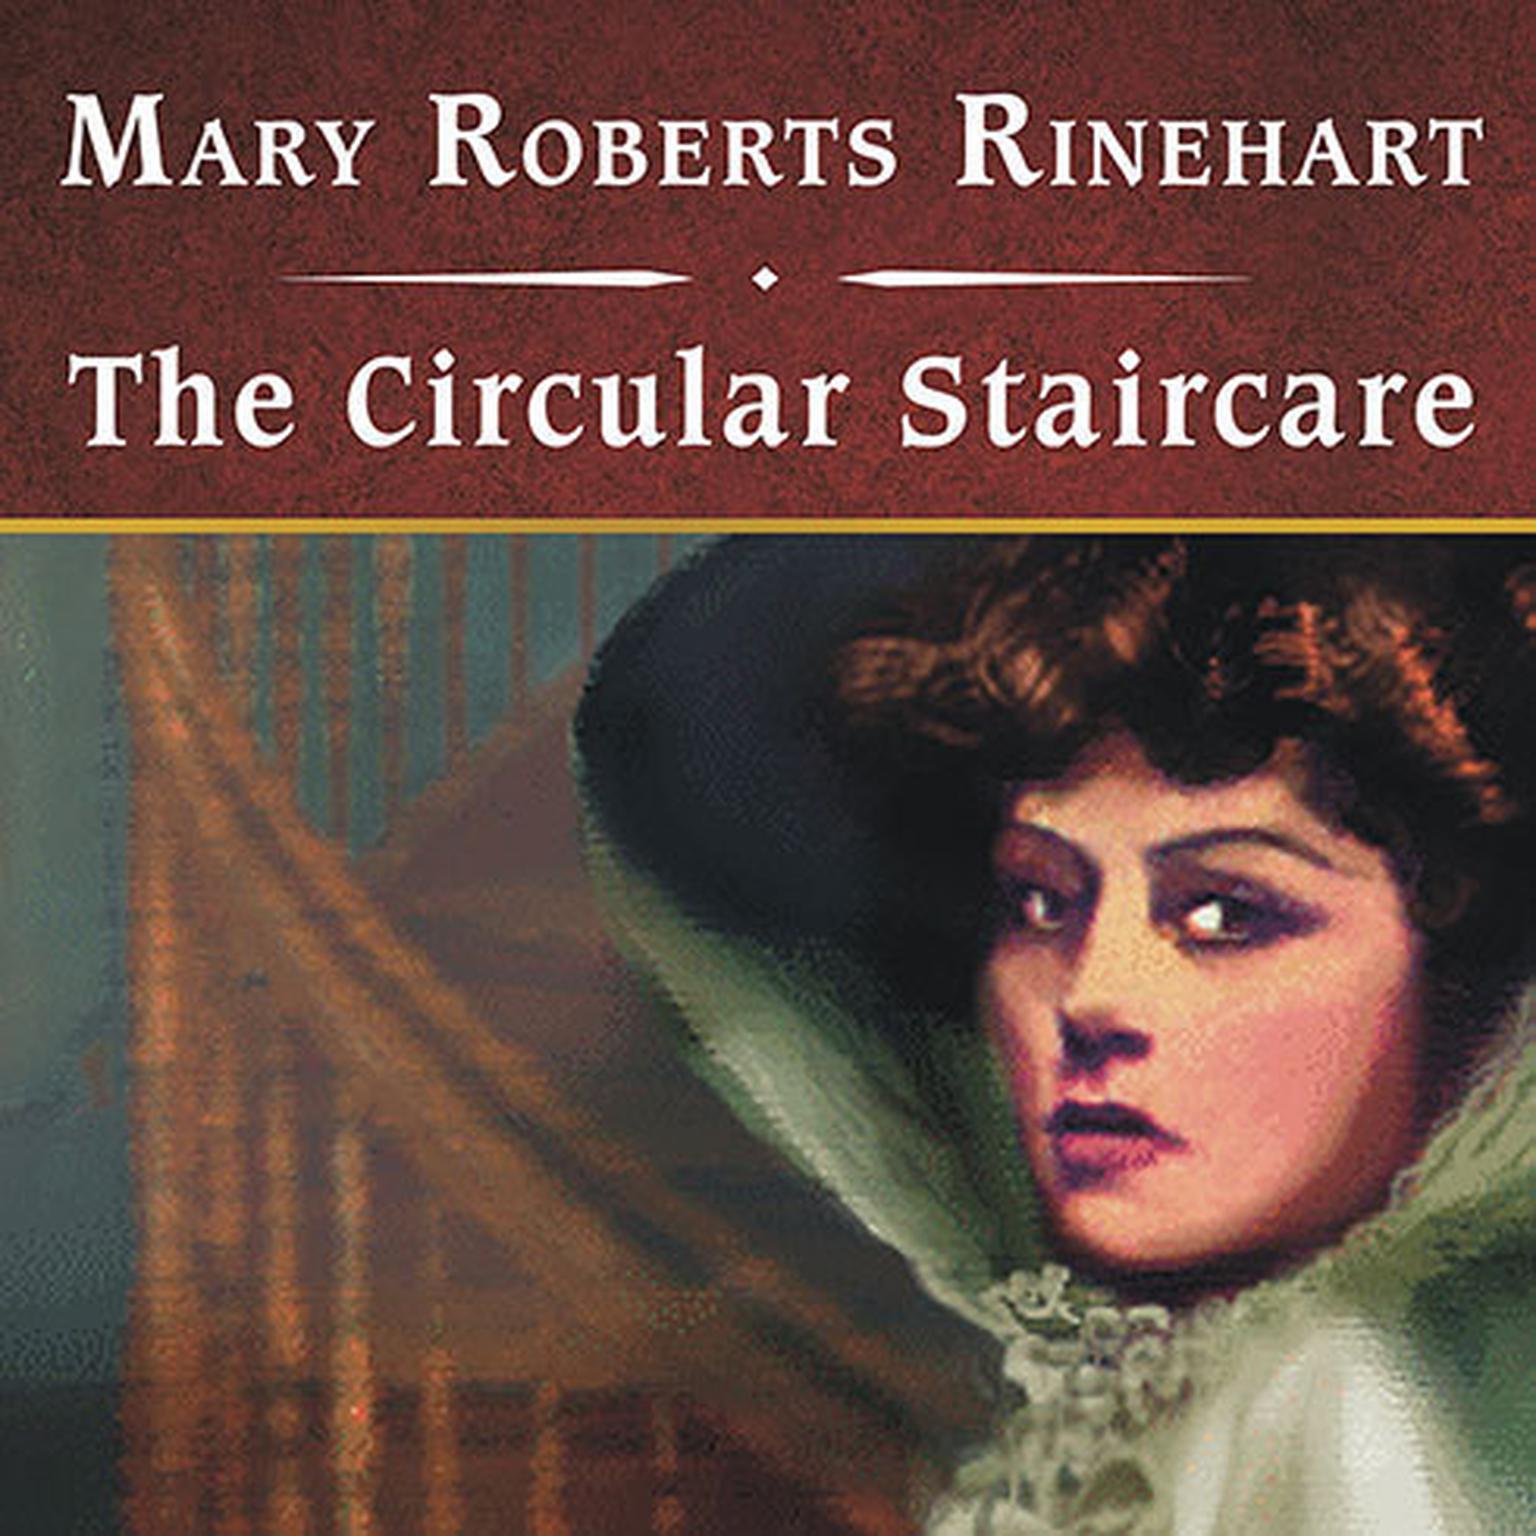 The Circular Staircase, with eBook Audiobook, by Mary Roberts Rinehart